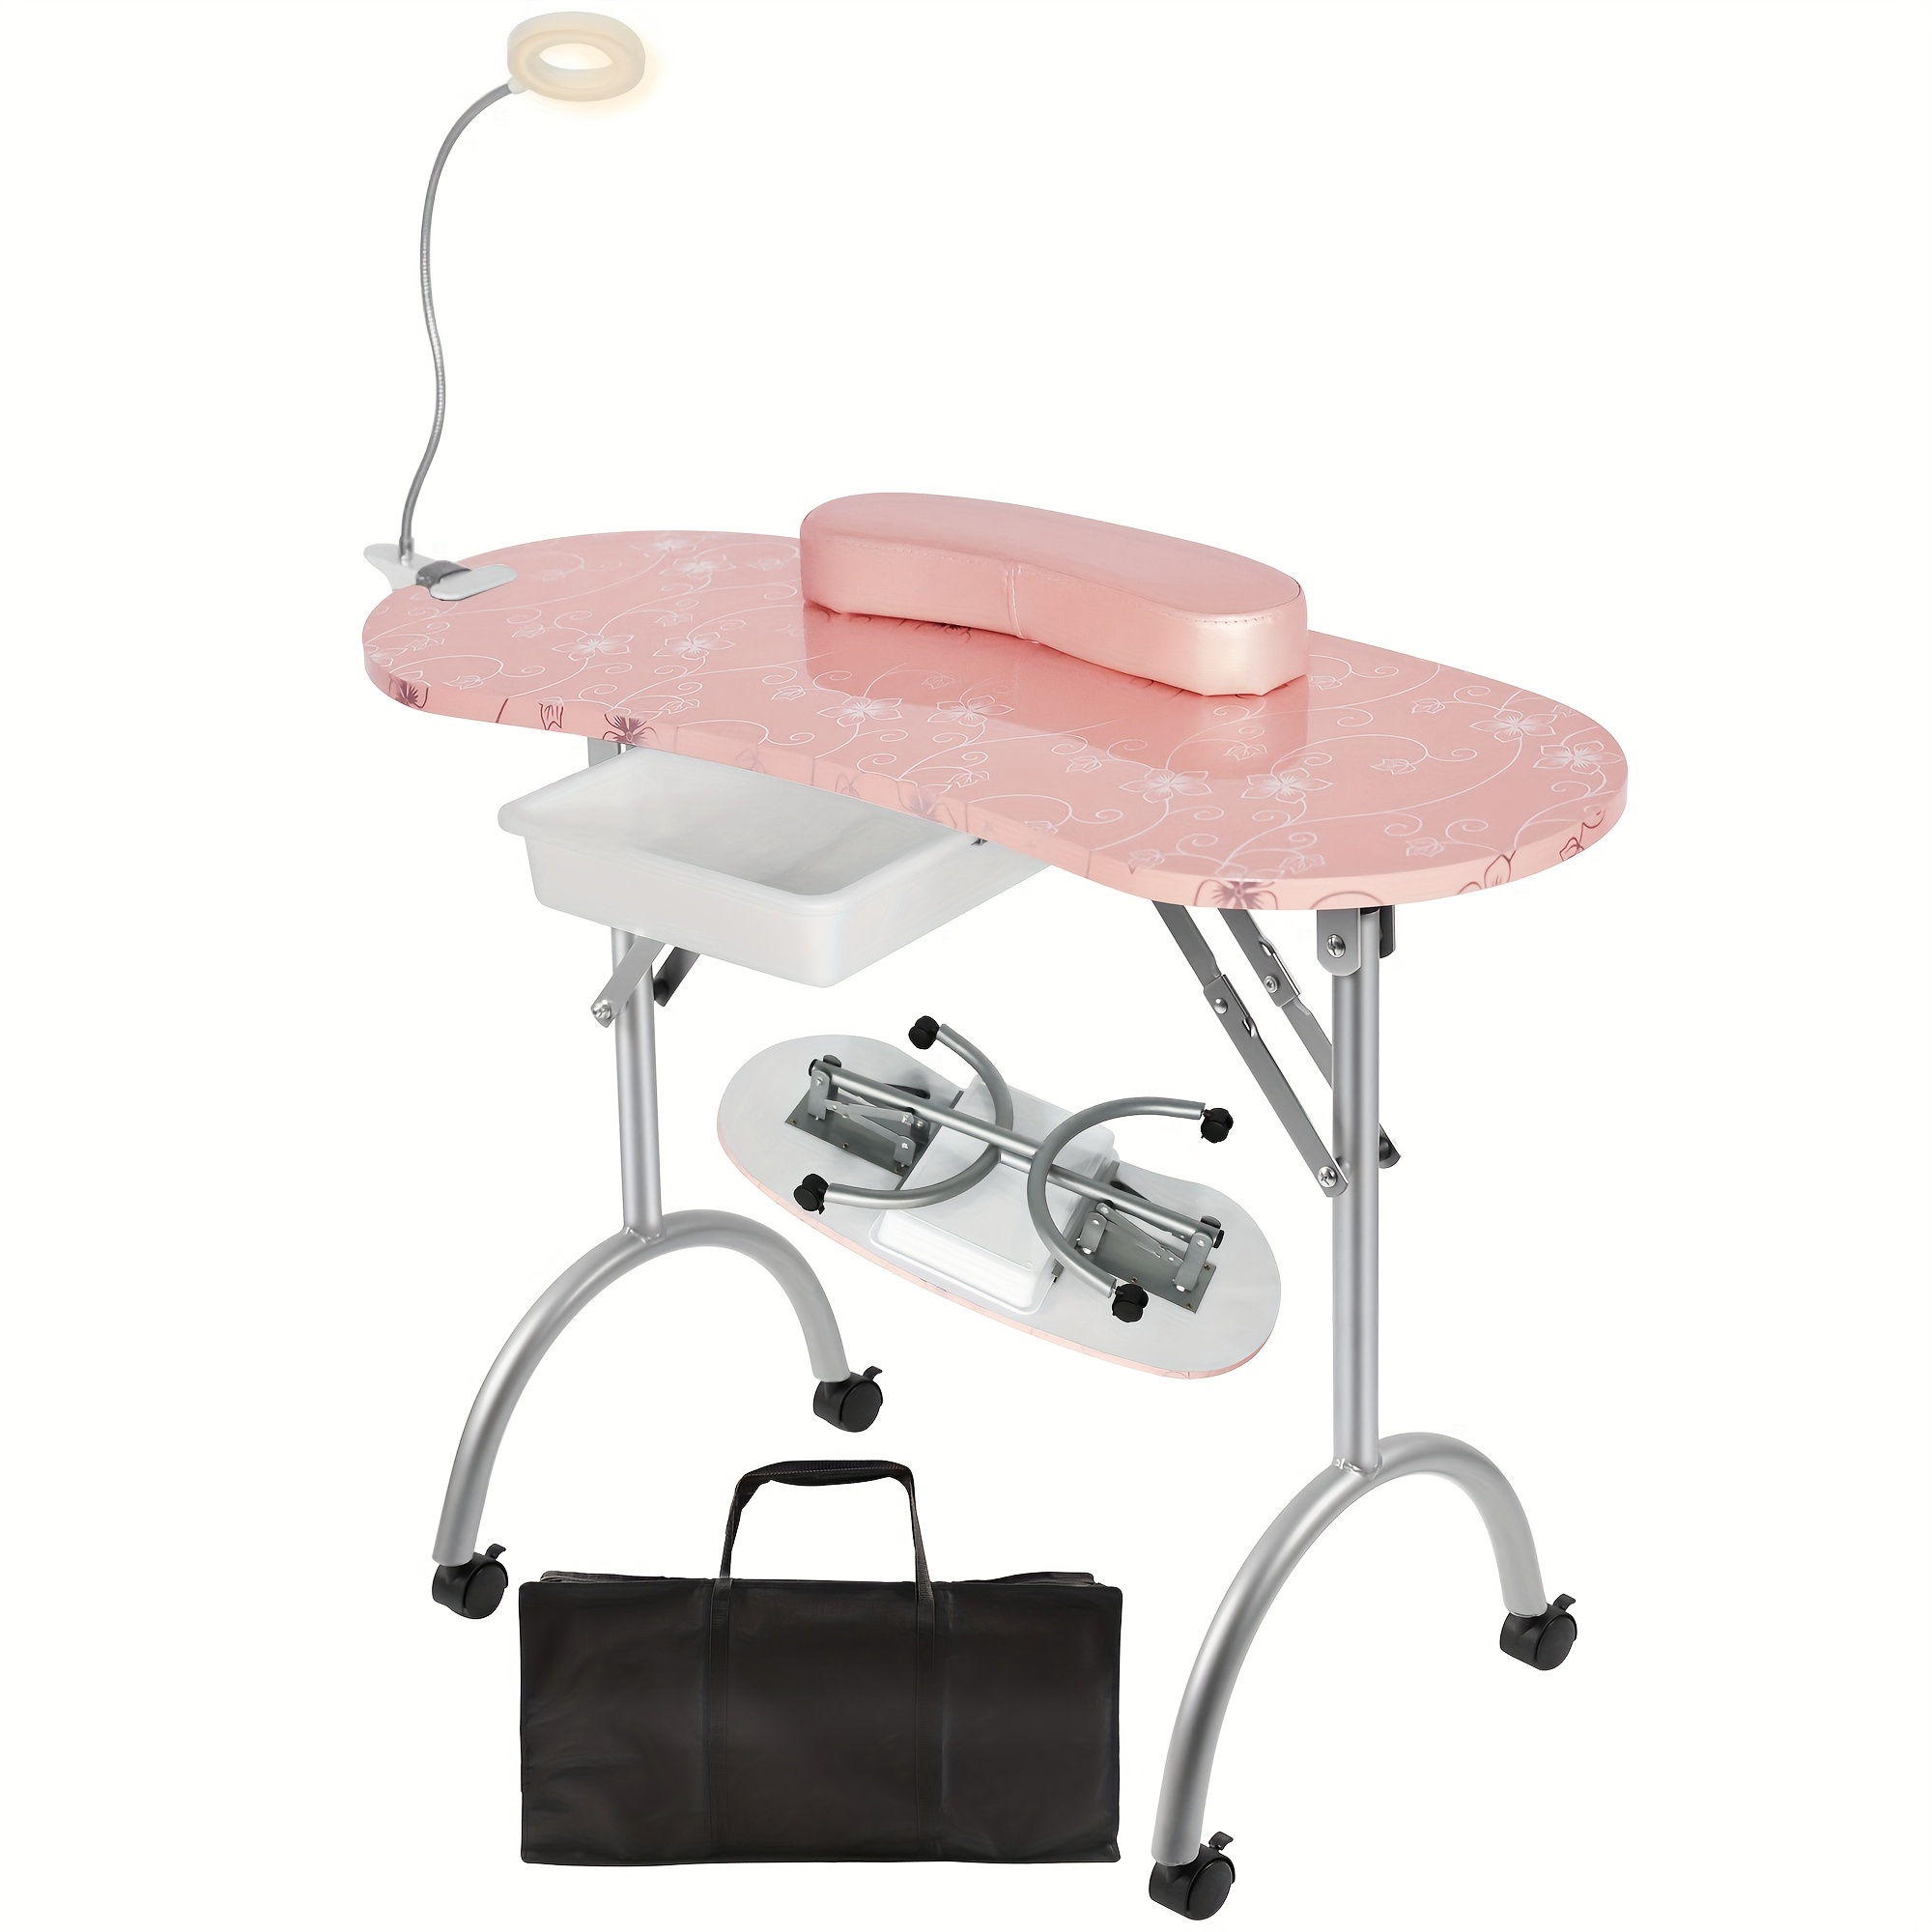 

Portable Manicure Nail Table, Foldable Manicure Table With Drawer, Led Lamp, 4 Lockable Wheels And Carry Bag, Professional Nail Desk With Wrist Cushion